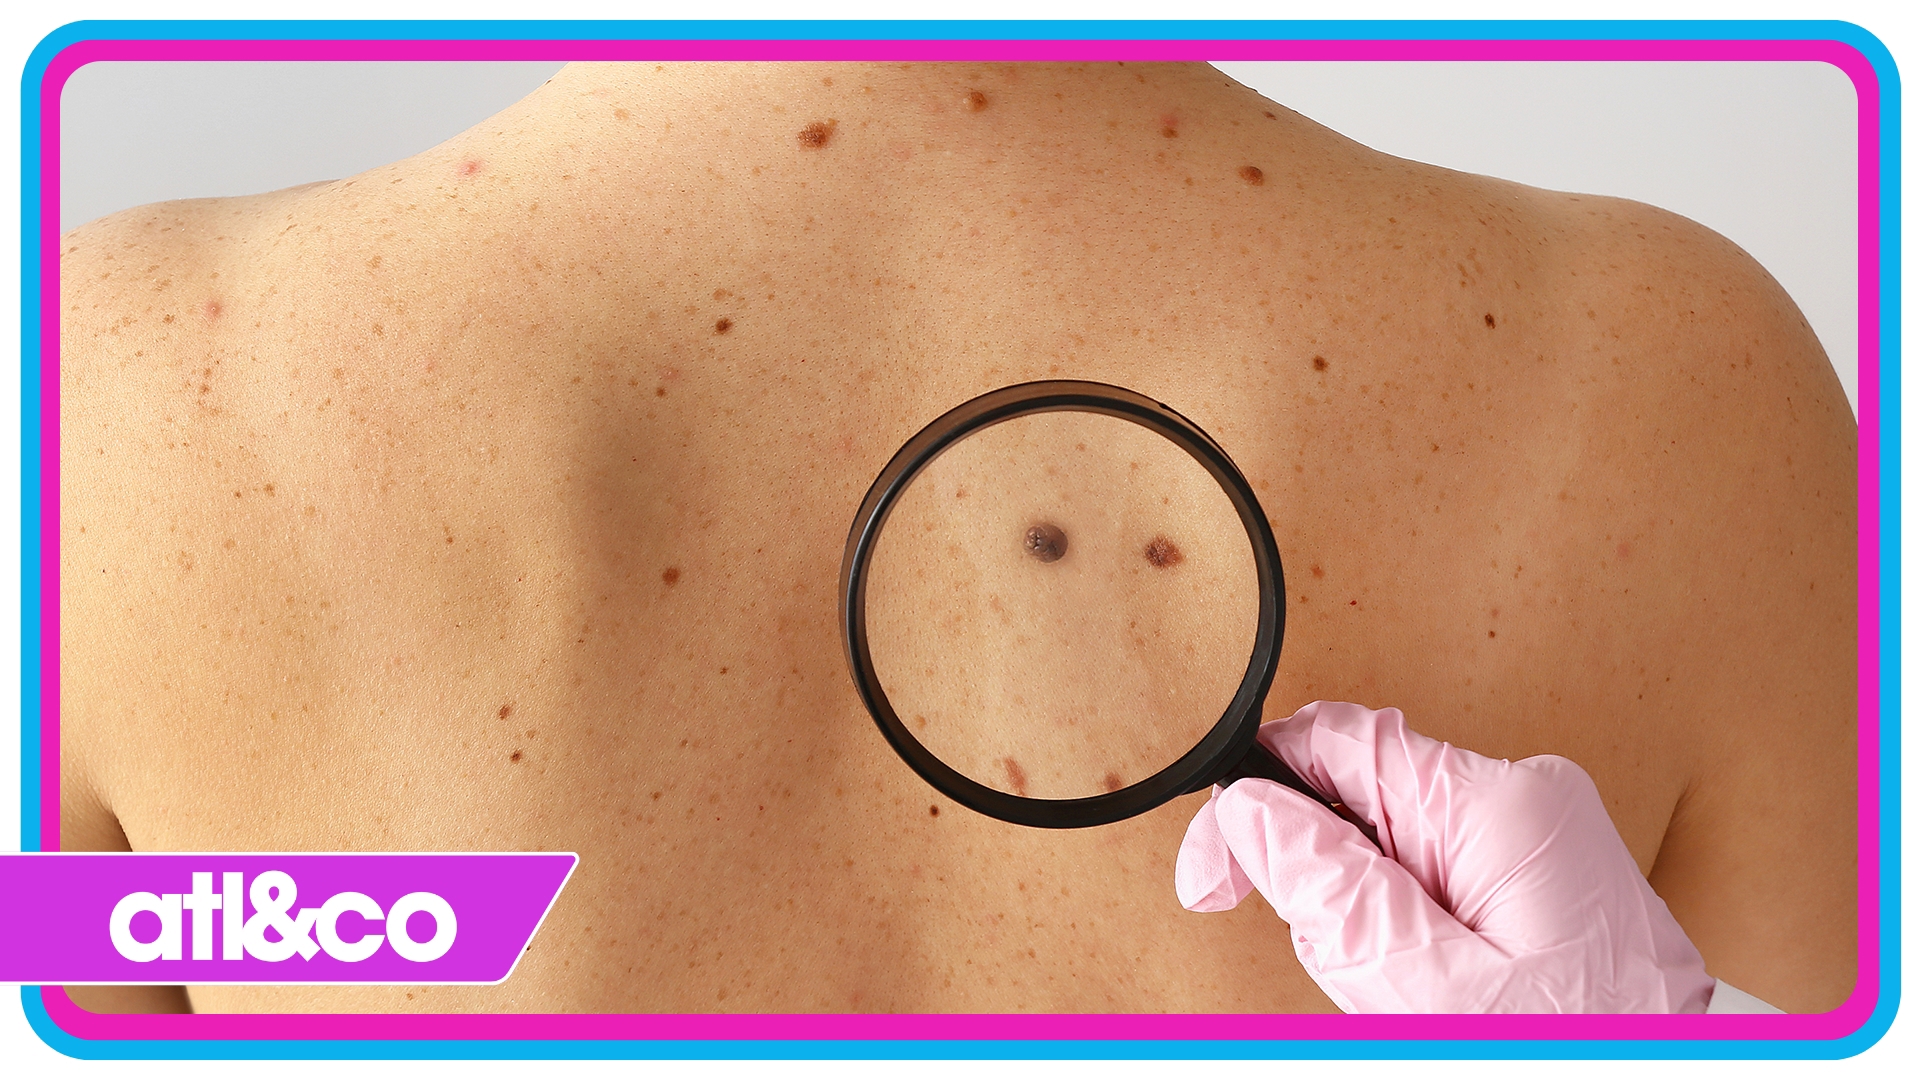 Learn about the signs to look for and how to prevent skin cancer.